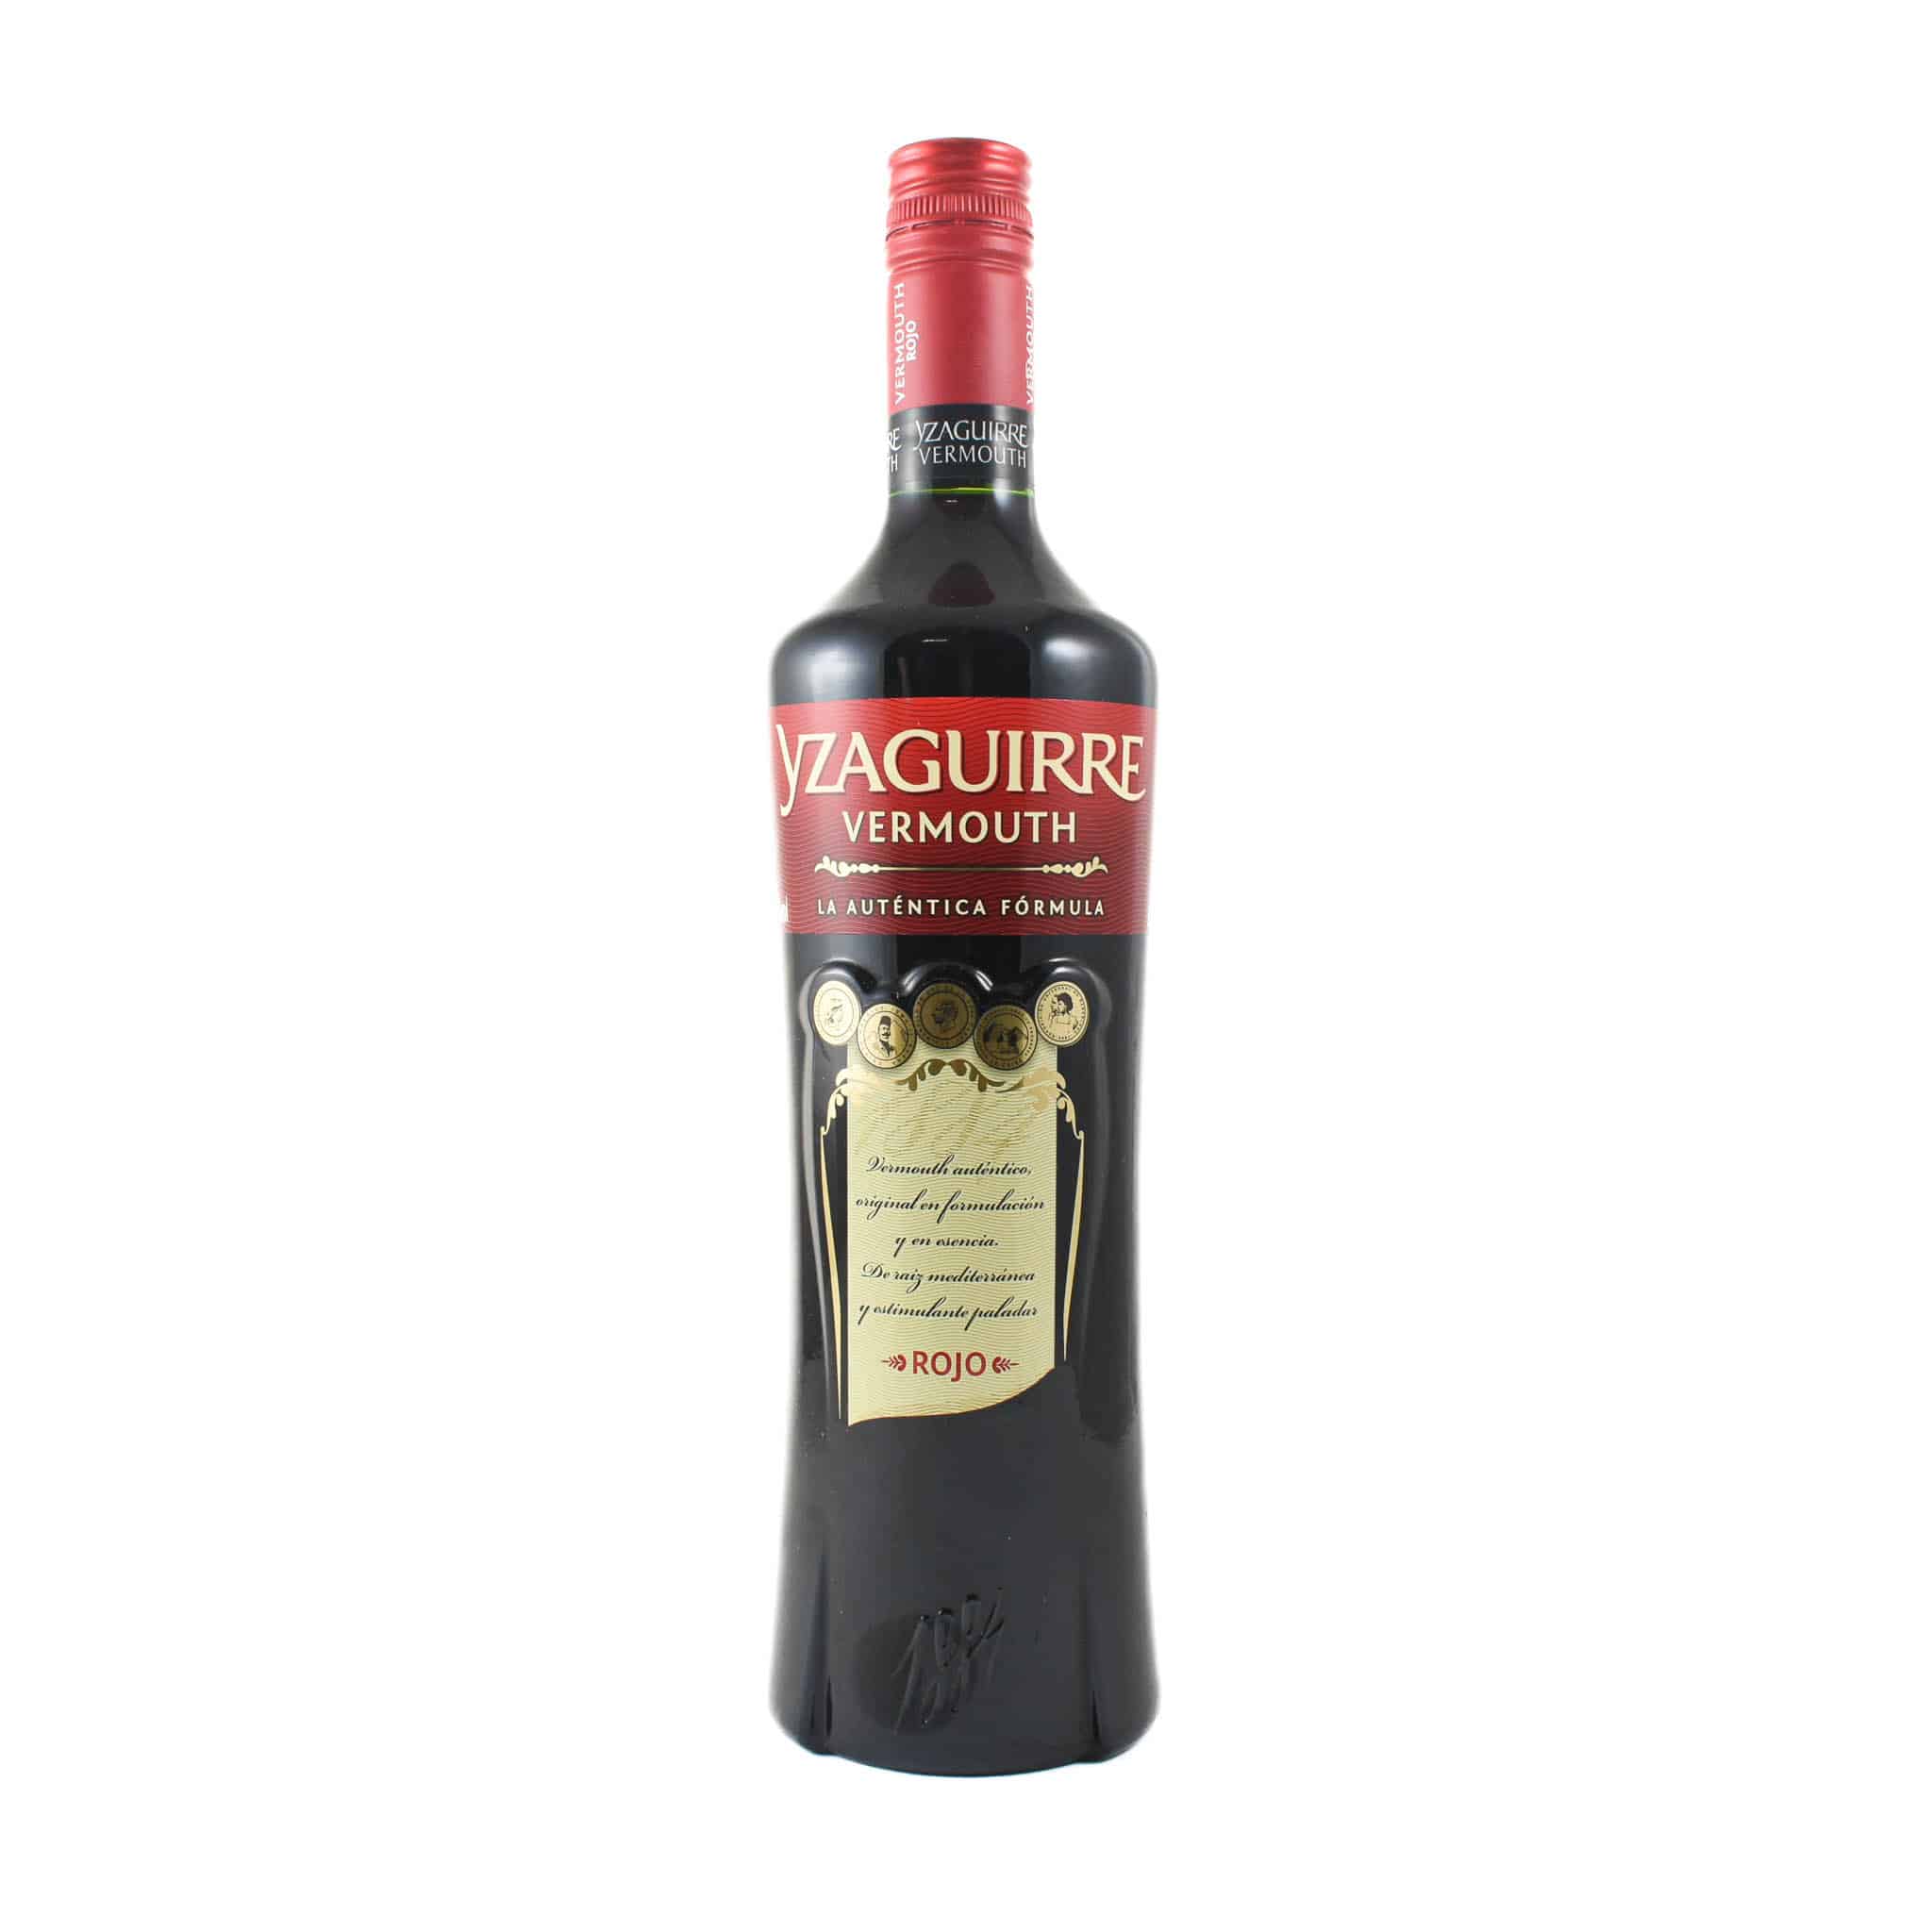 Yzaguirre Classic Spanish Rojo Vermouth, 1 Litre